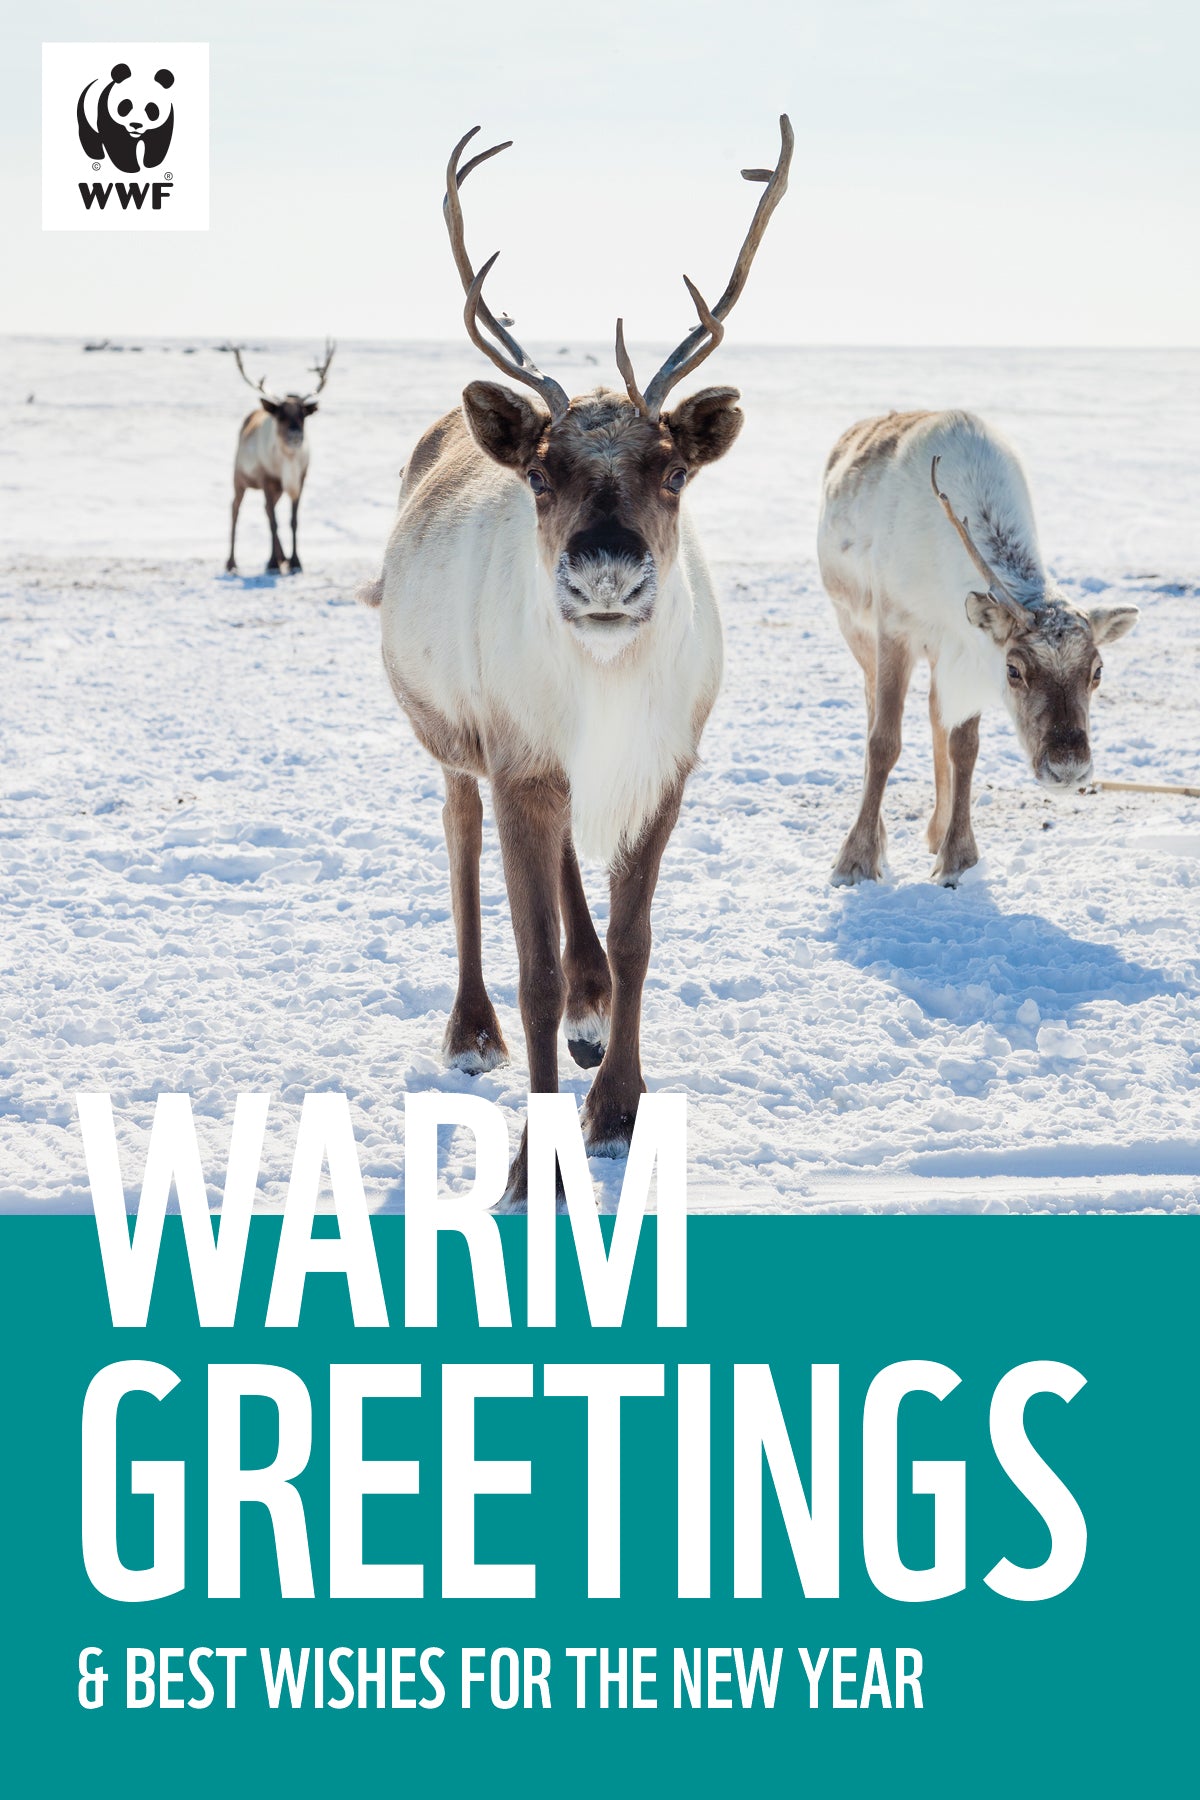 Holiday greeting card - caribou image. "Warm greetings & best wishes for the New Year"